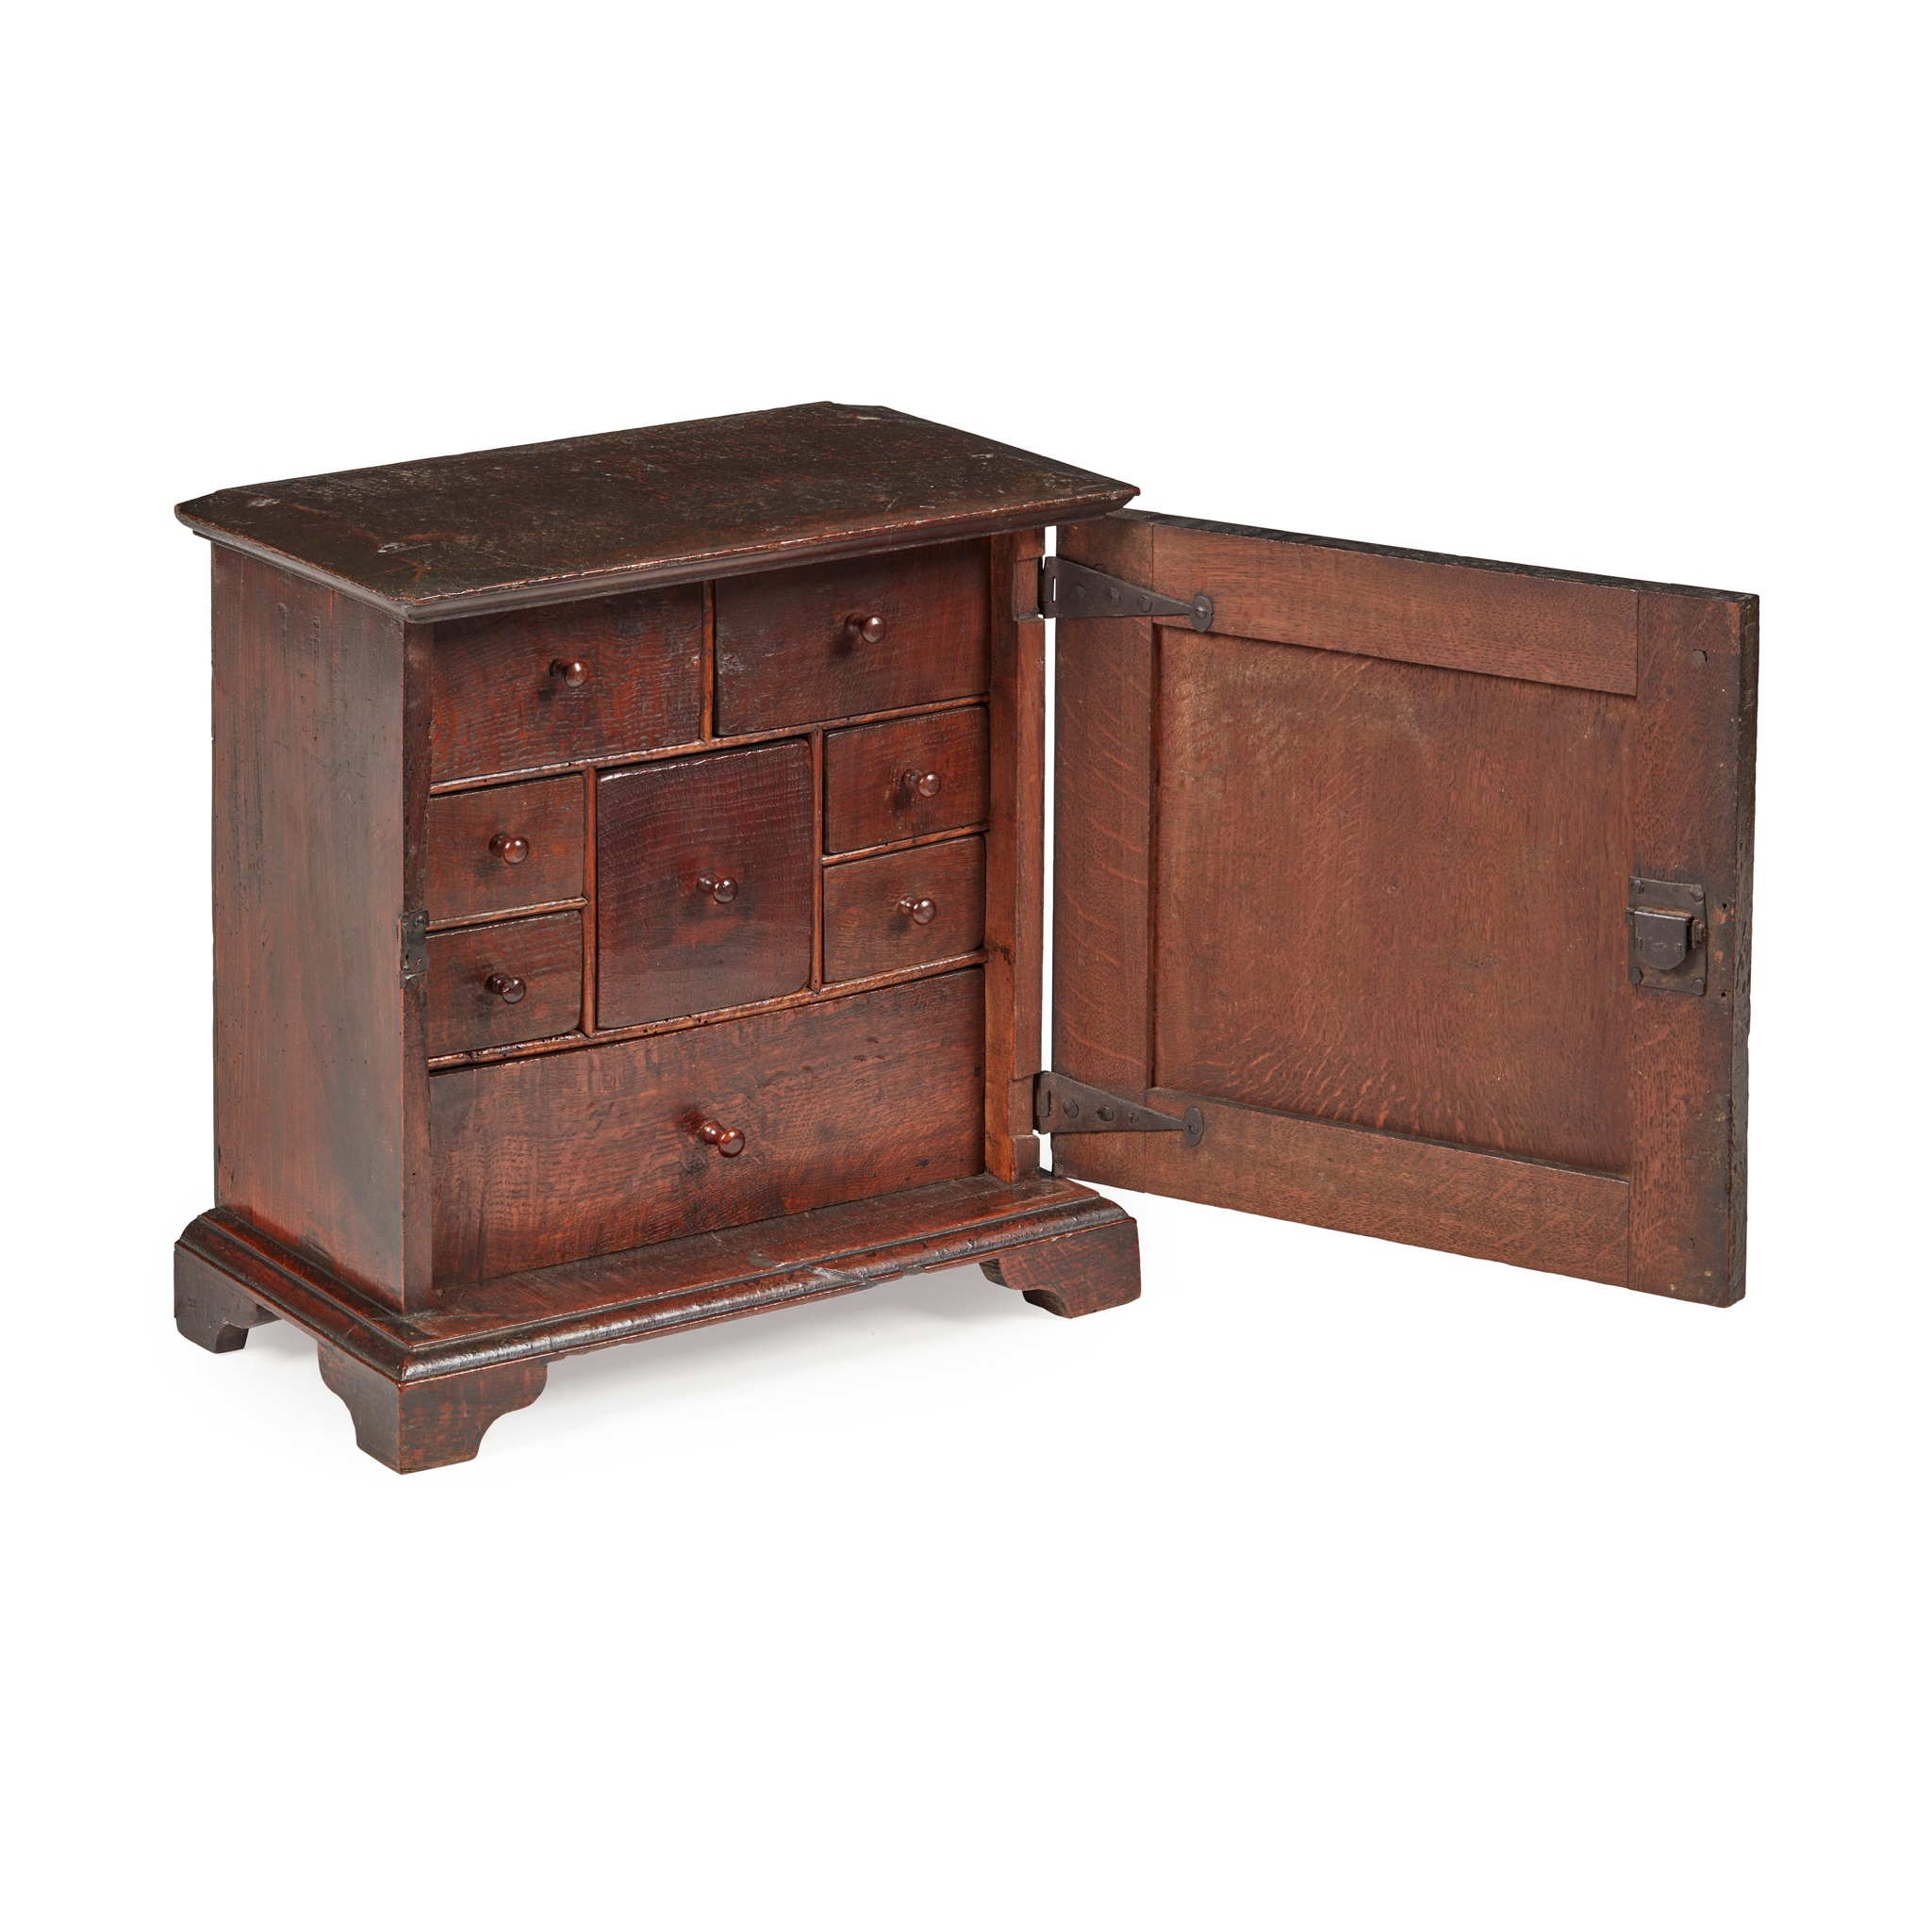 GEORGE I OAK SPICE CABINET EARLY 18TH CENTURY - Image 2 of 3